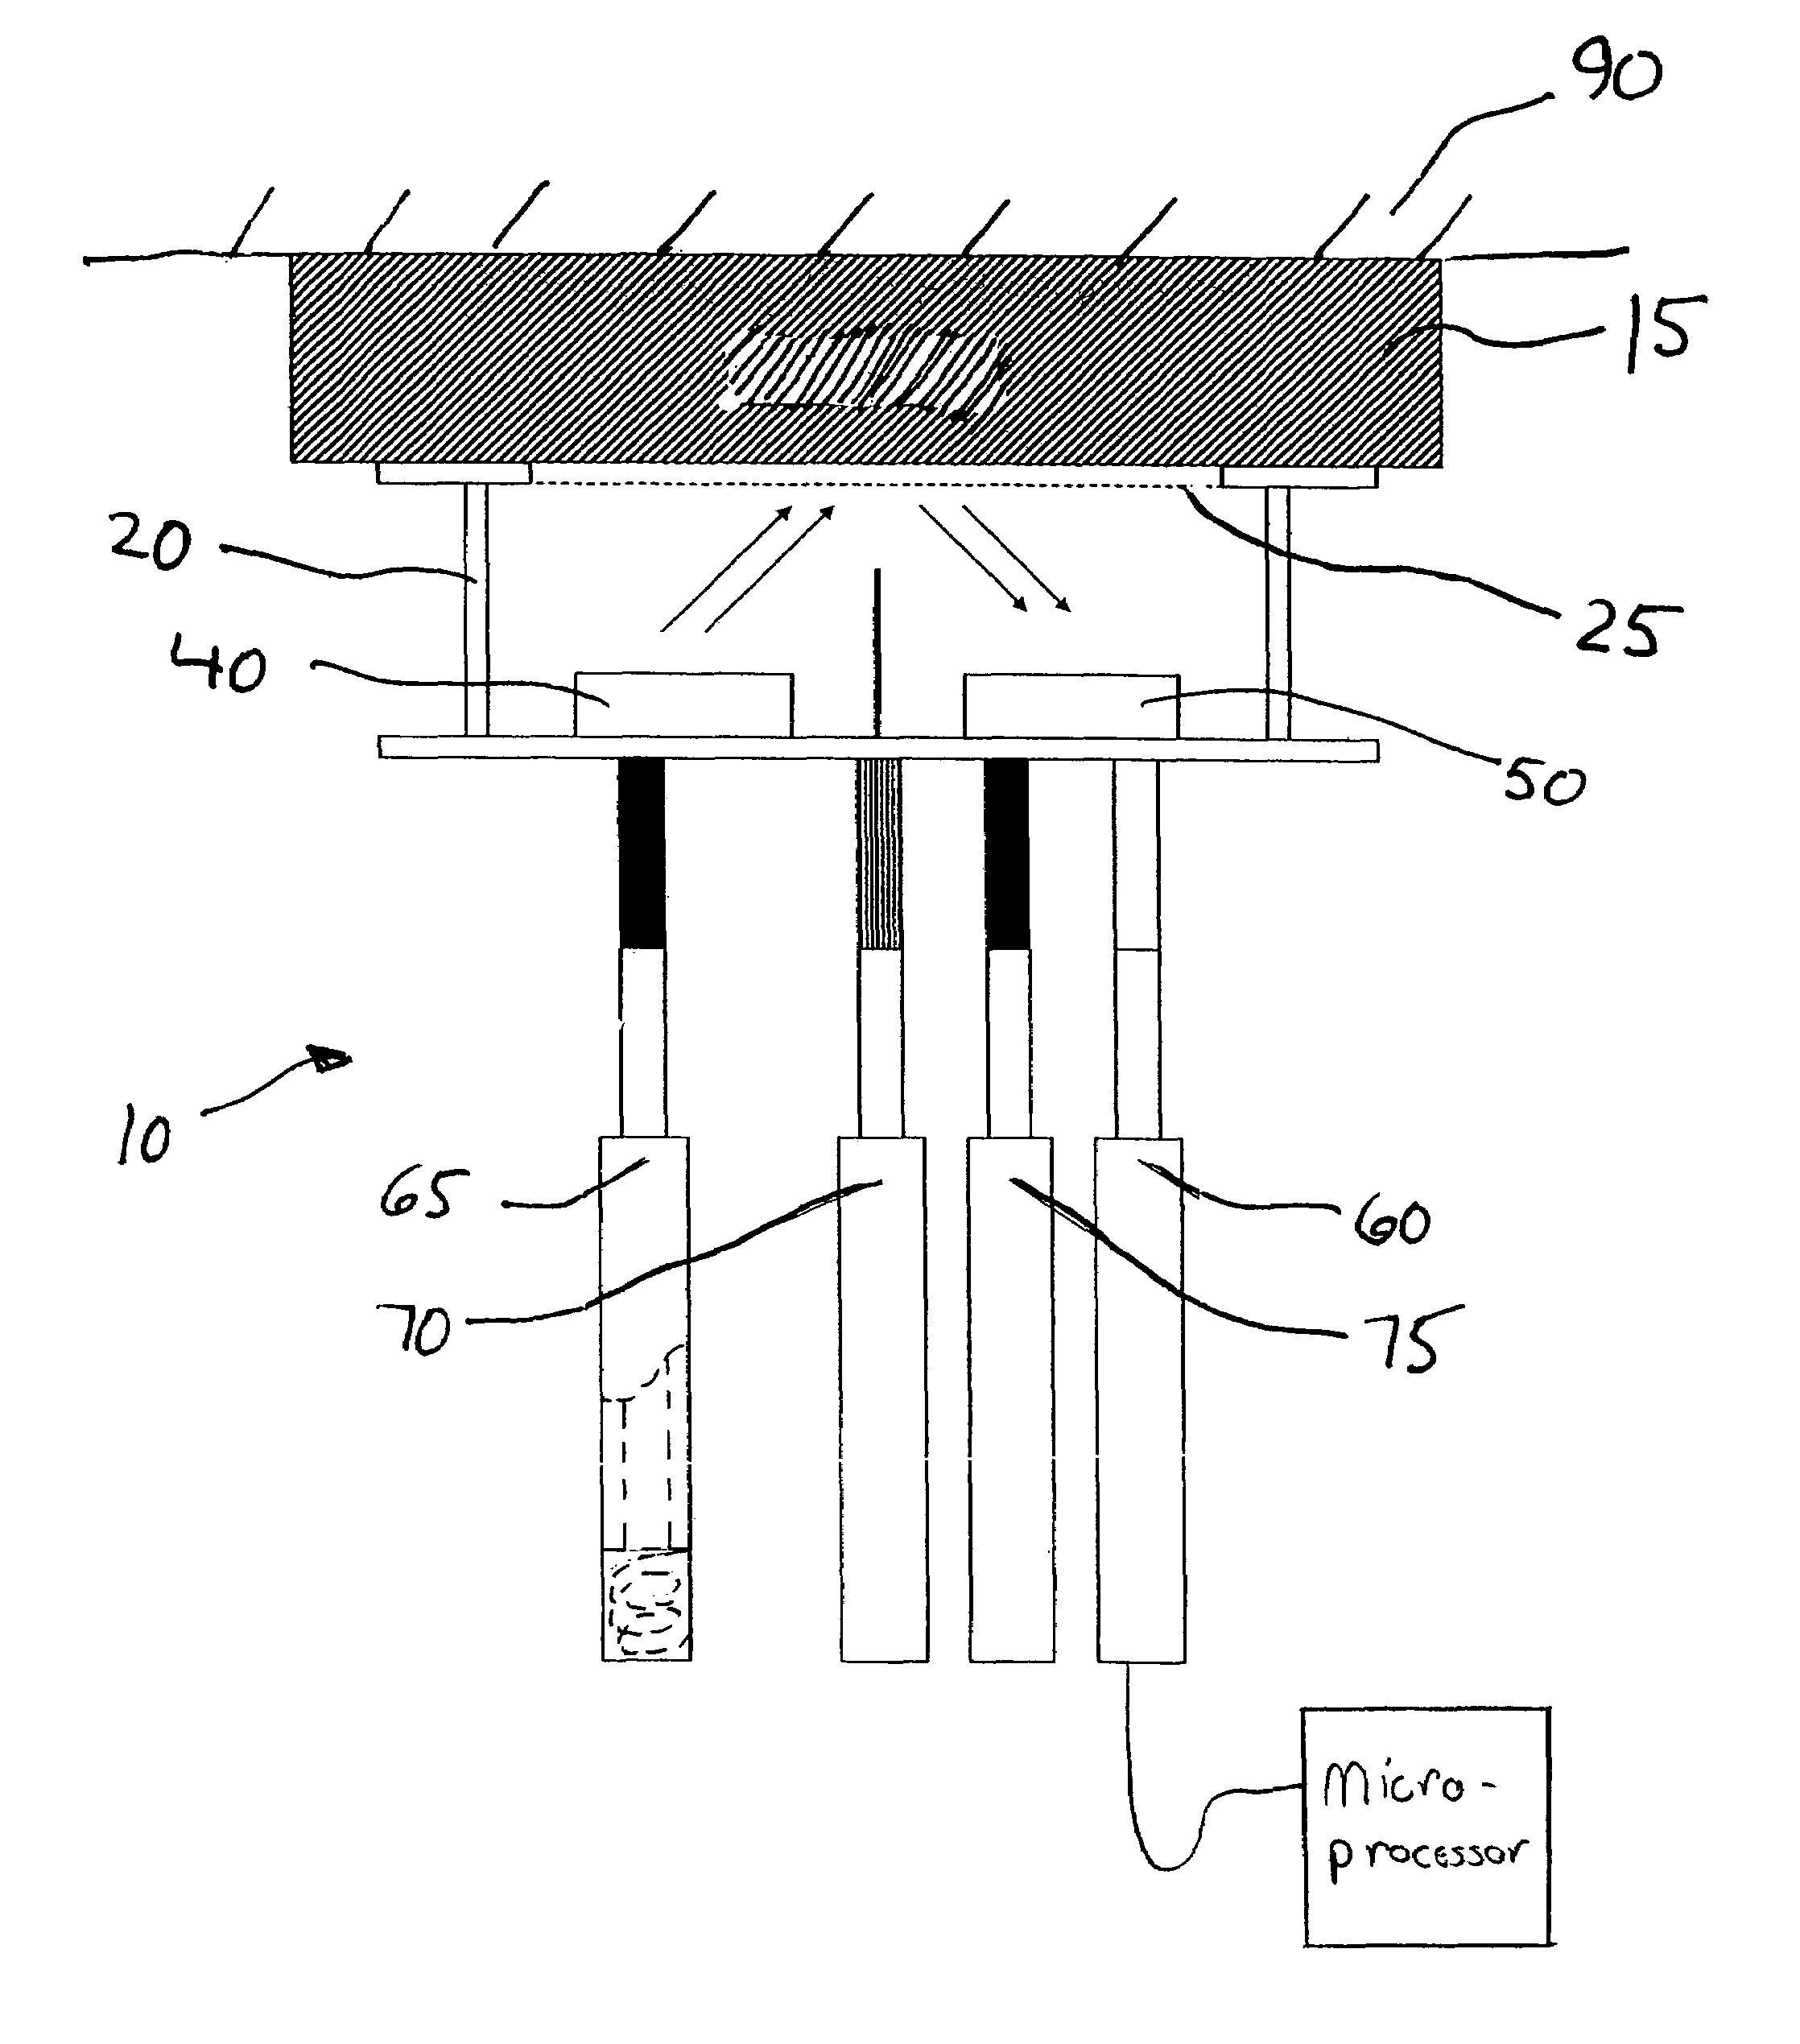 Method and apparatus for determining presence of a component in a printed circuit board